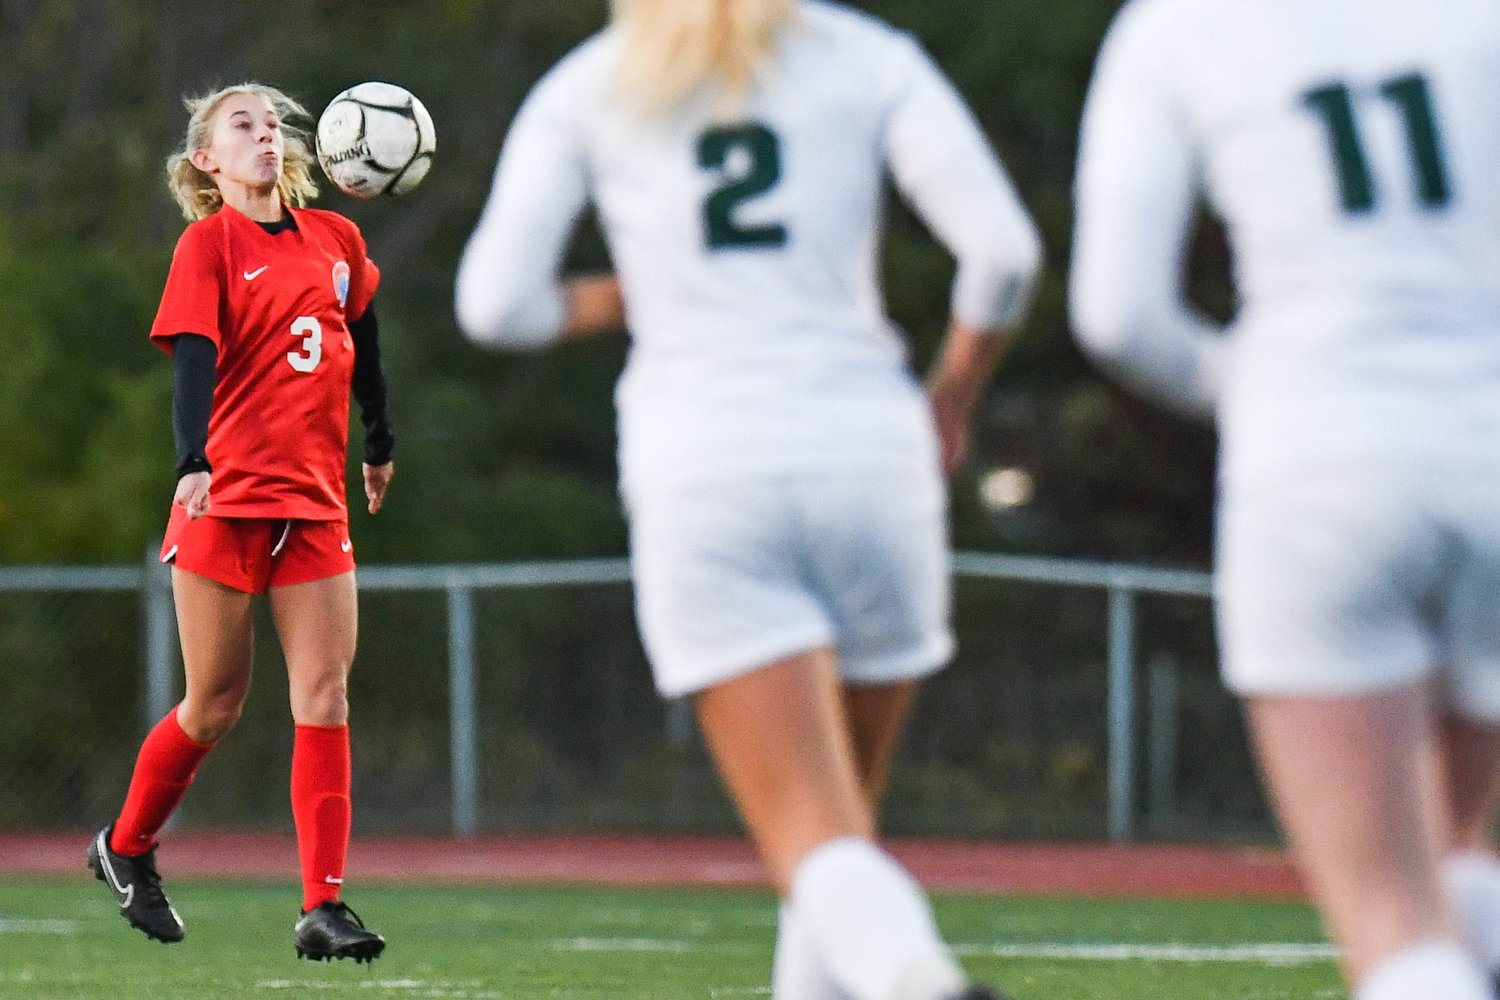 New Hartford's Grace Serafin settles the ball during the game against Fayetteville-Manlius on Monday night in New Hartford. The Spartans won 4-0, and the defending Class A state champions' unbeaten streak is now 51 games.